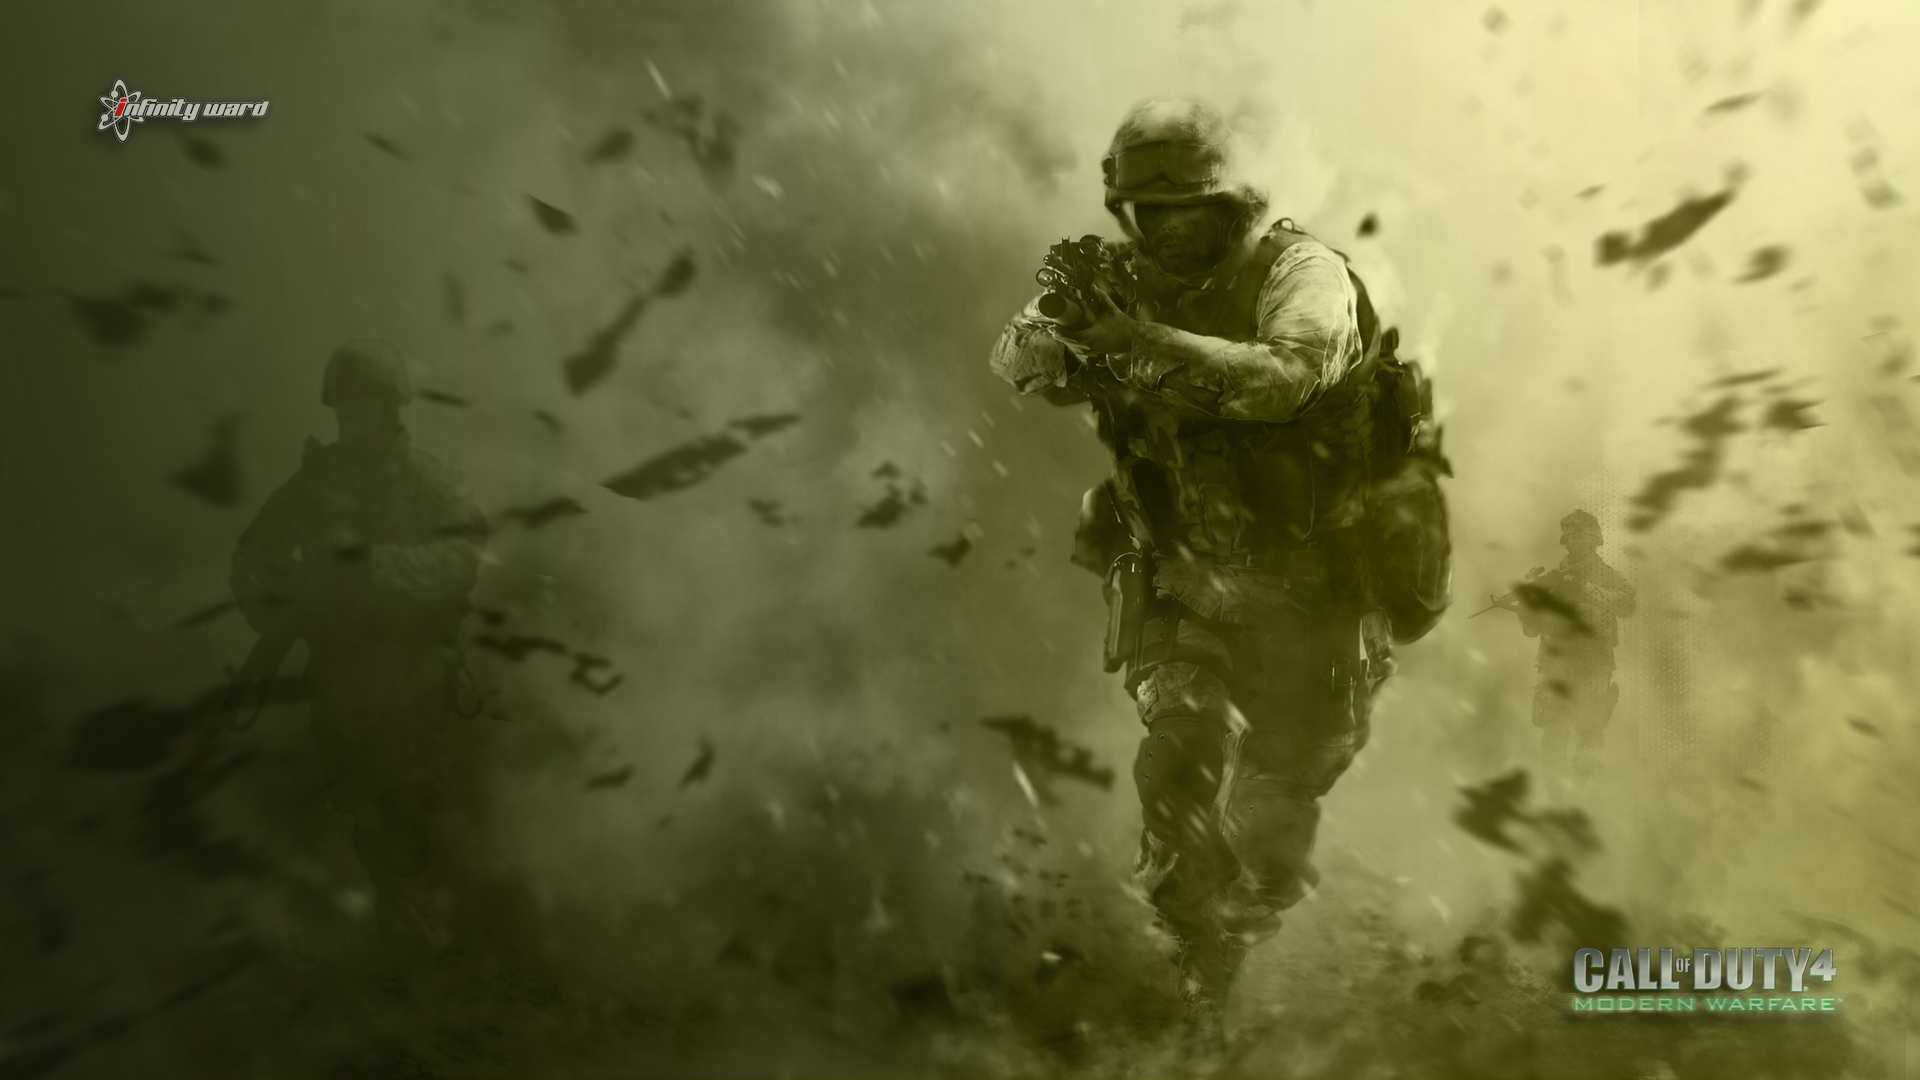 Image - Call Of Duty 4 Wallpaper 28159 - Call of Duty Wiki - Wikia